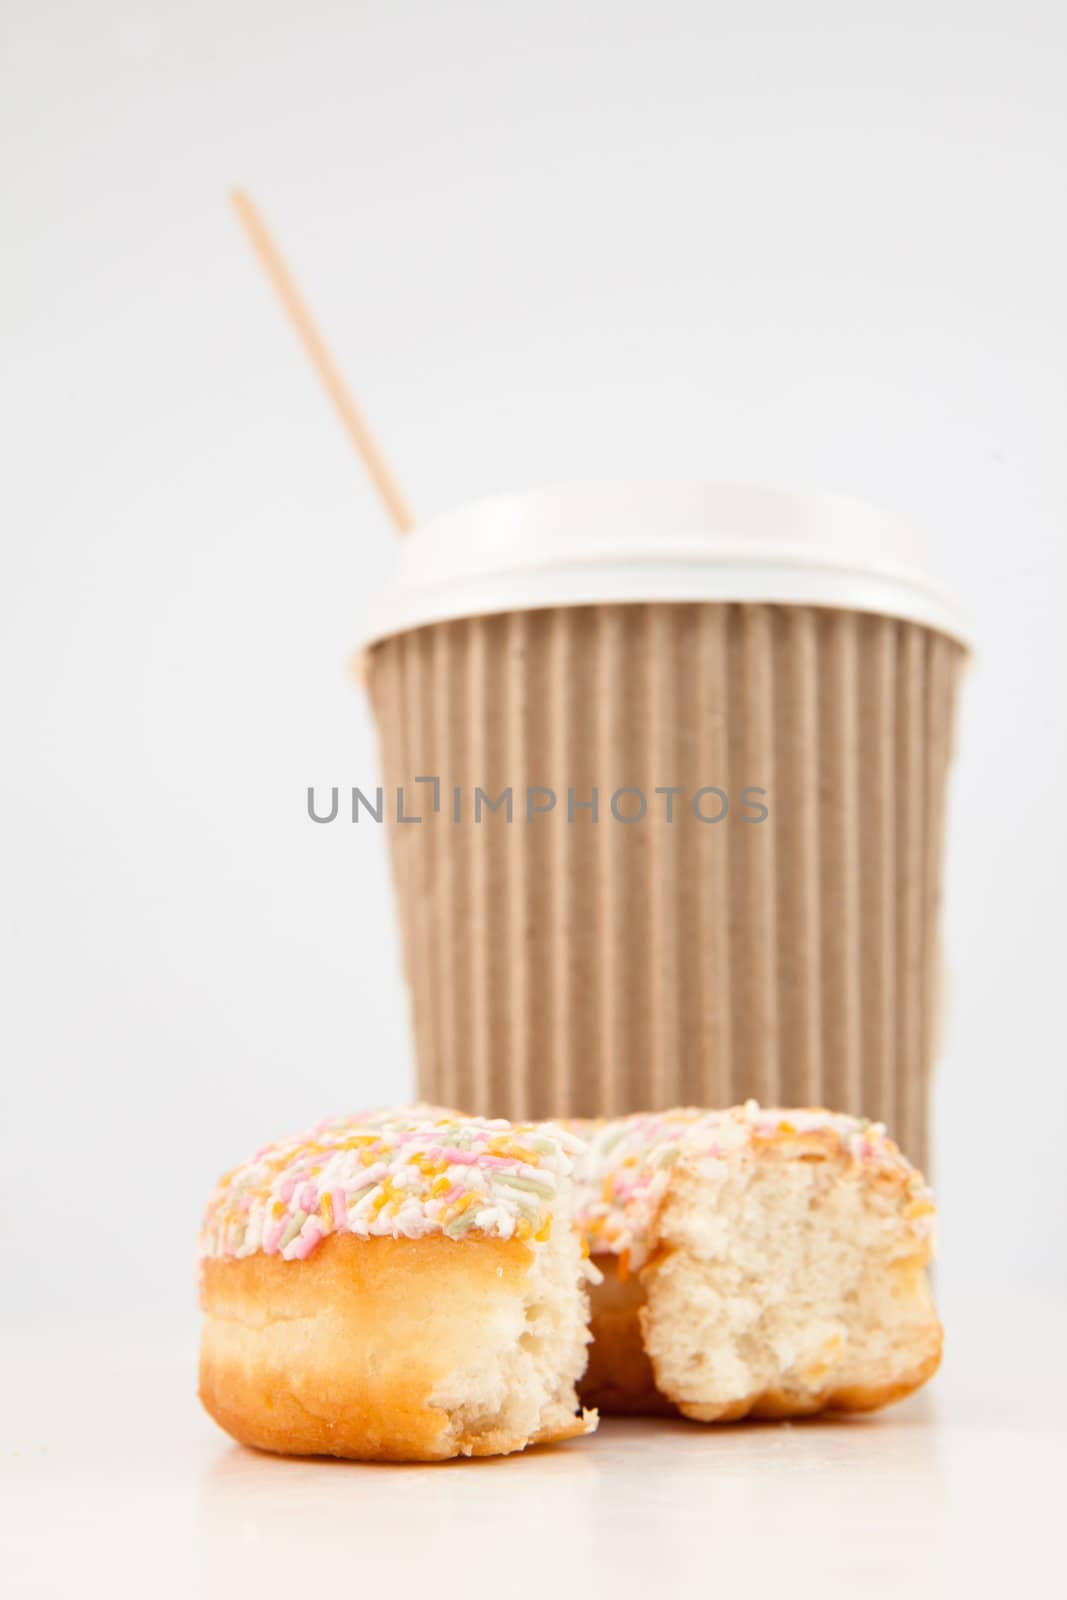 An half eaten doughnut and a cup of tea placed together by Wavebreakmedia